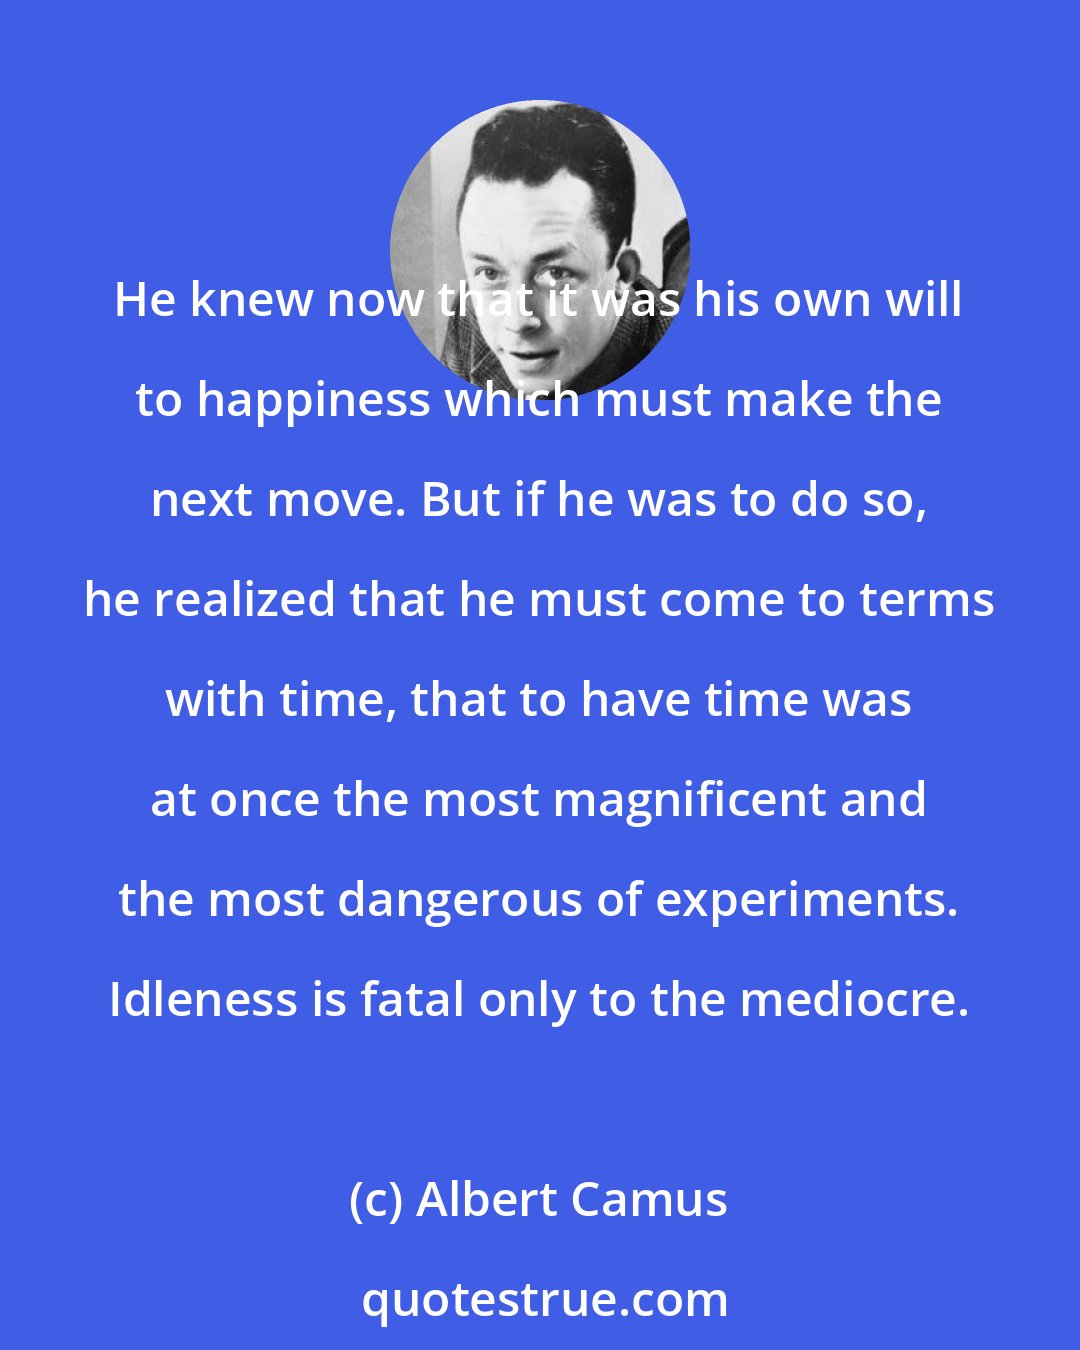 Albert Camus: He knew now that it was his own will to happiness which must make the next move. But if he was to do so, he realized that he must come to terms with time, that to have time was at once the most magnificent and the most dangerous of experiments. Idleness is fatal only to the mediocre.